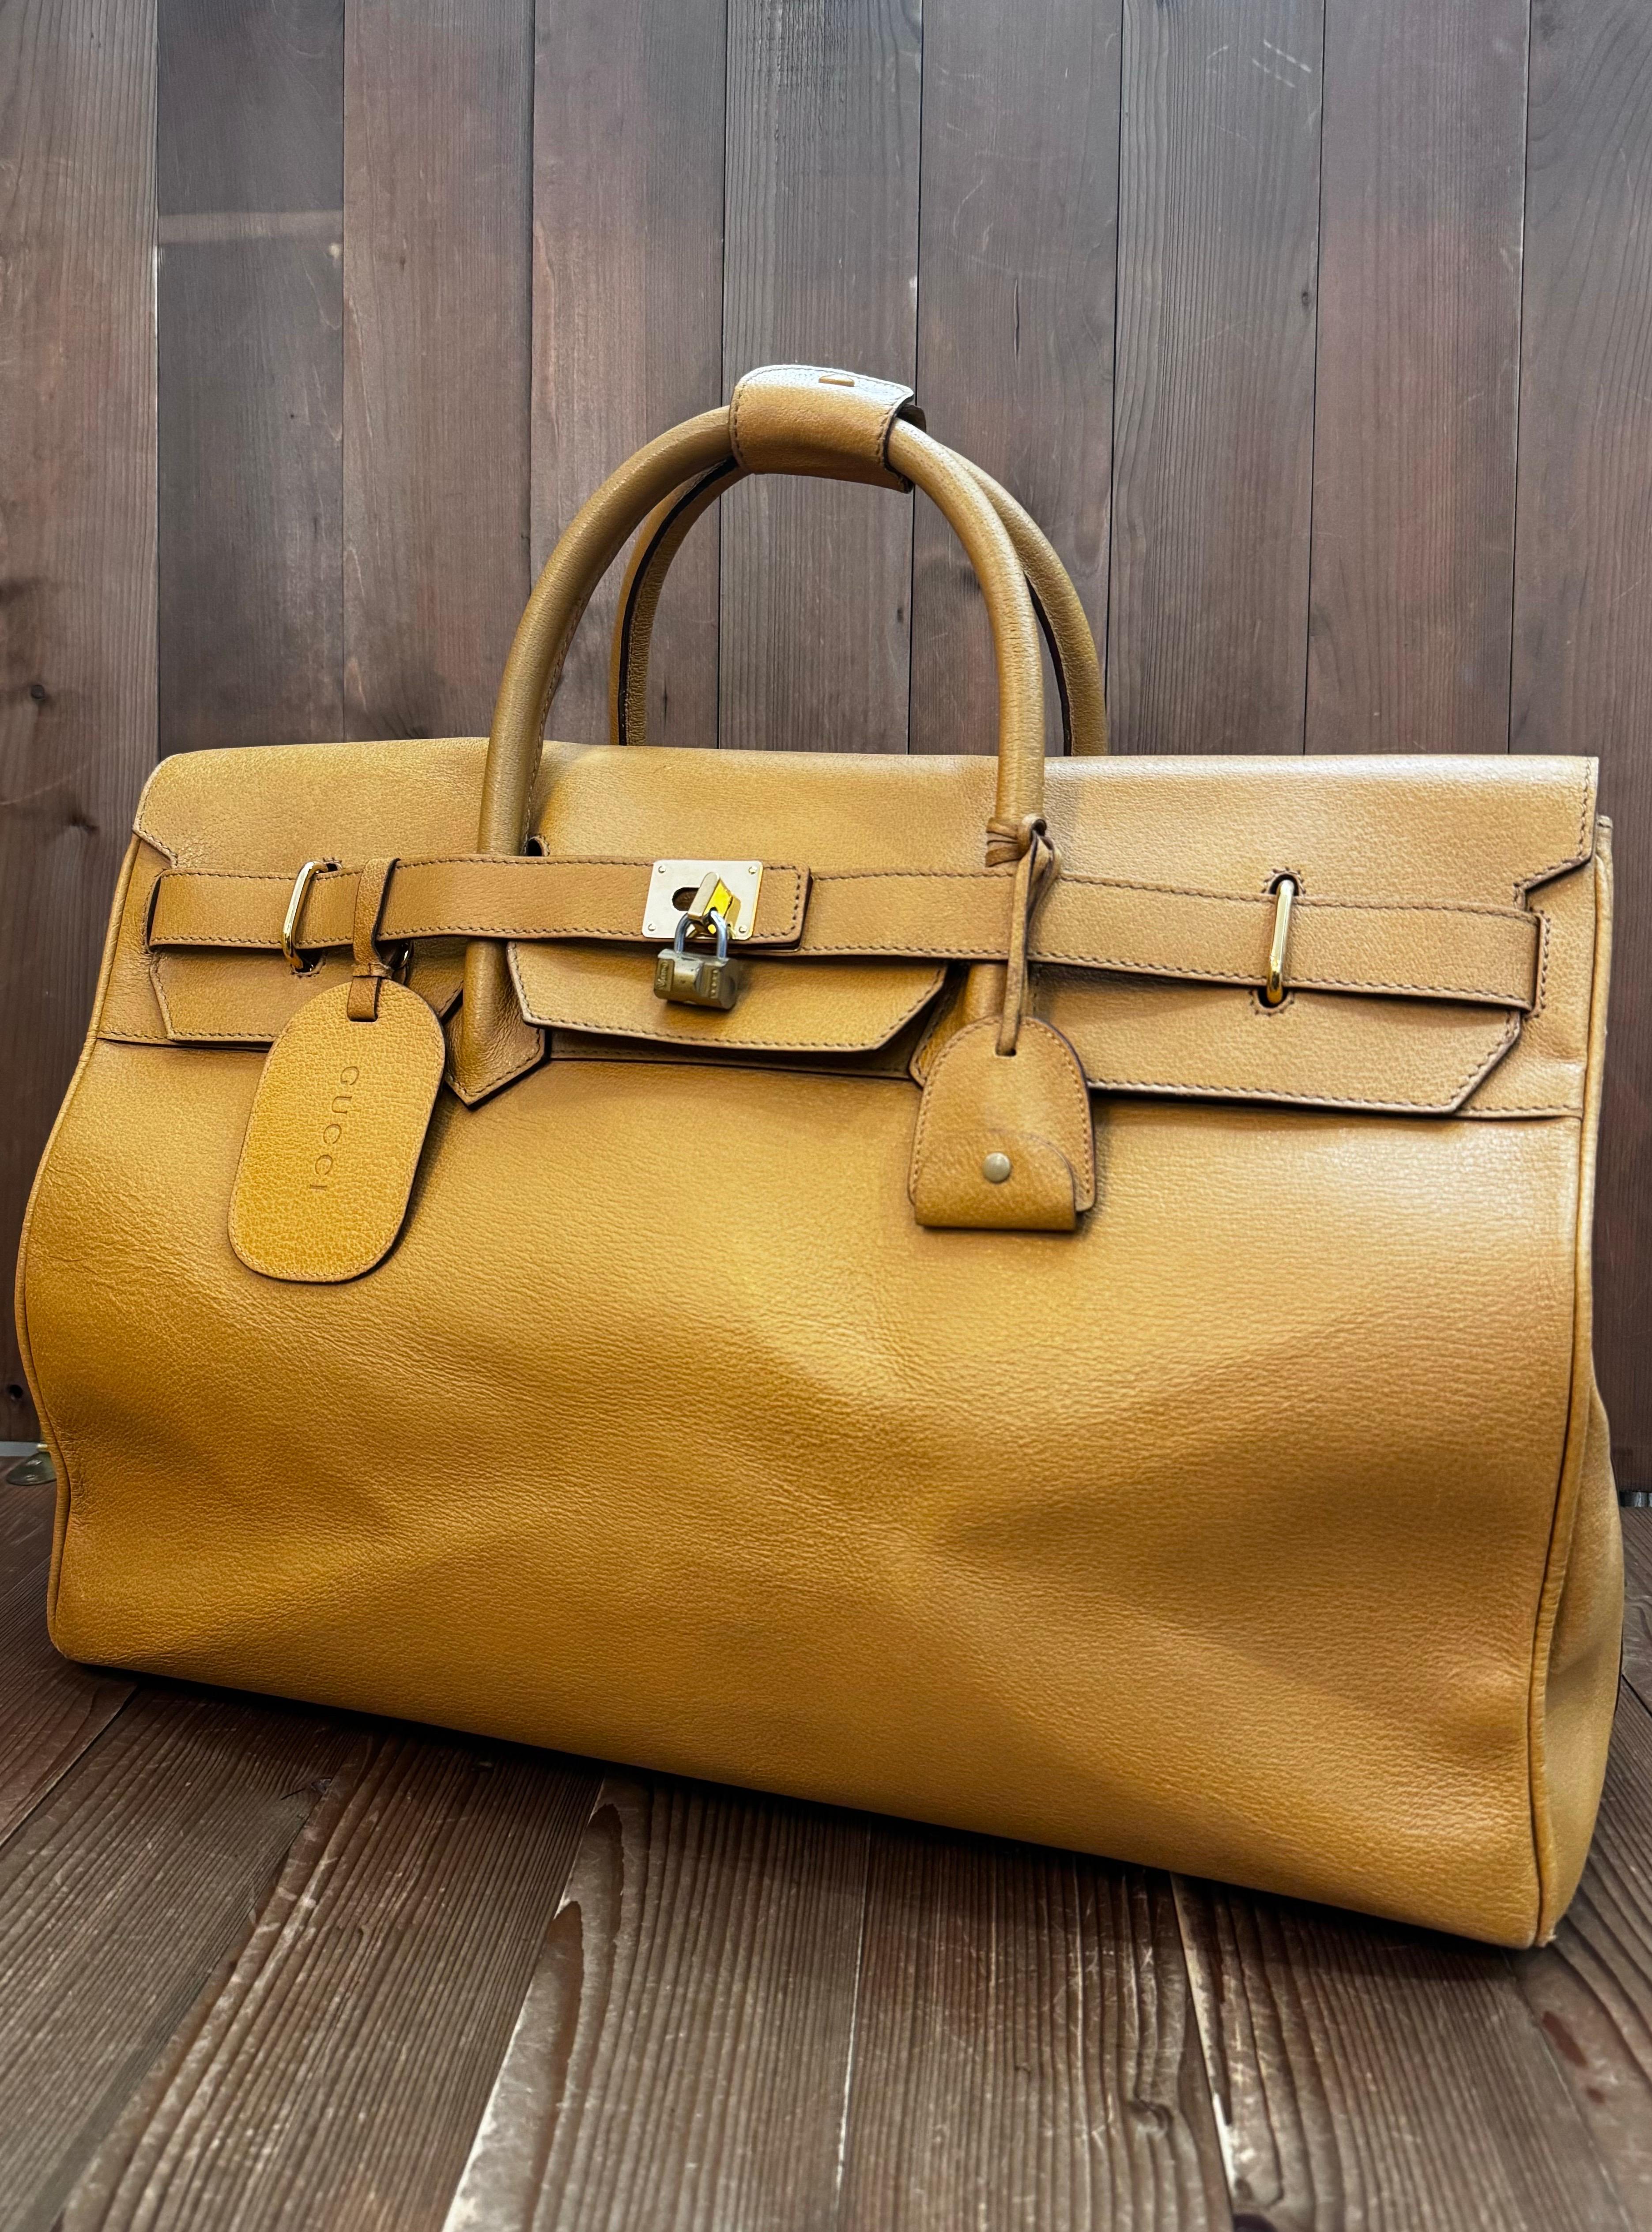 This vintage GUCCI extra large duffle bag is crafted of pigskin leather in mustard yellow featuring gold toned hardware and rolled leather handles. Front flap closure opens to a diamanté jacquard interior featuring a zippered pocket. Made in Italy.